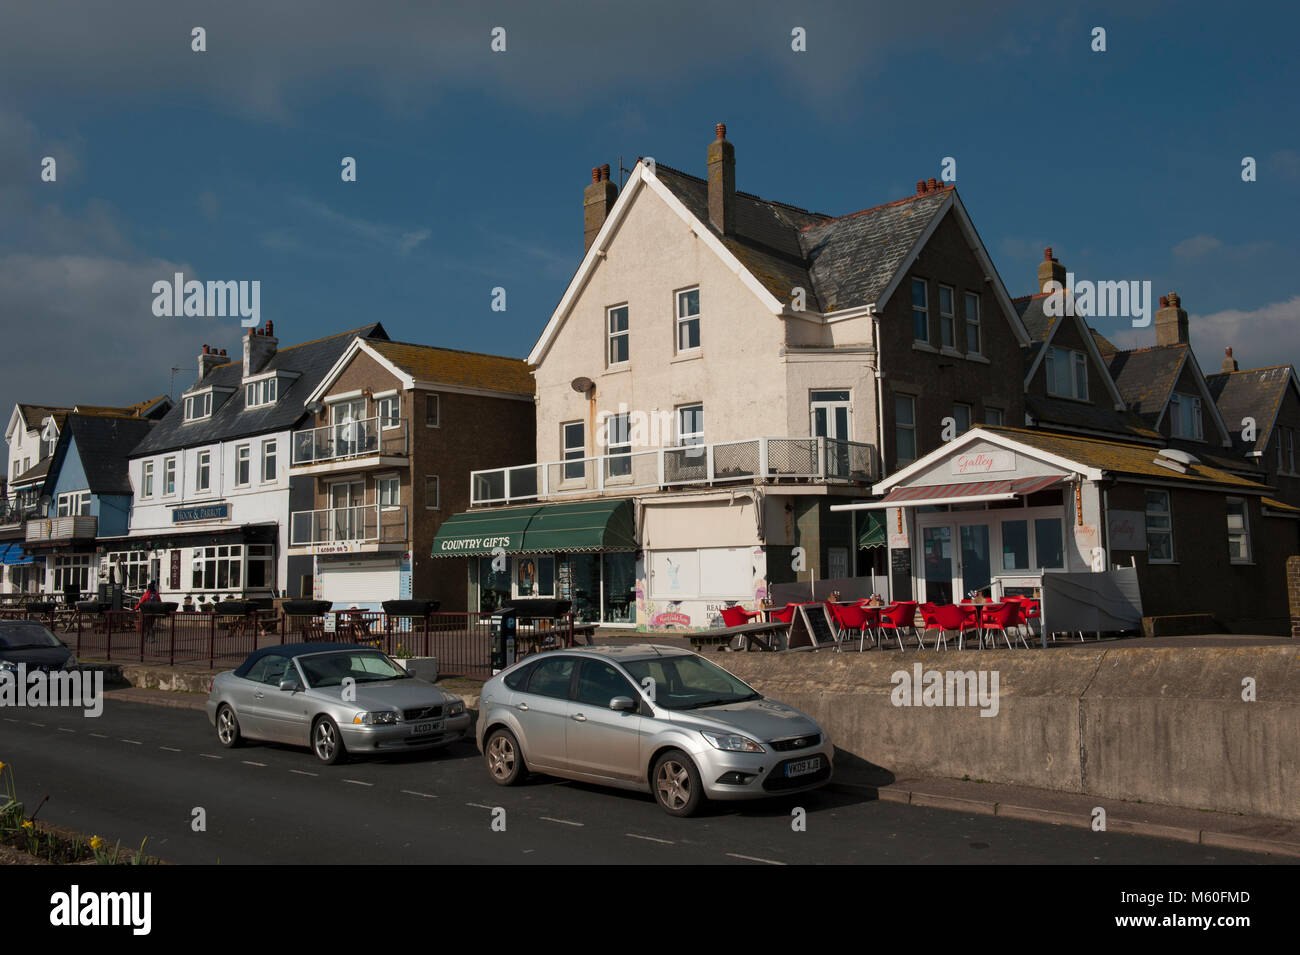 Shops, cafes and properties along East Walk in Seaton Stock Photo